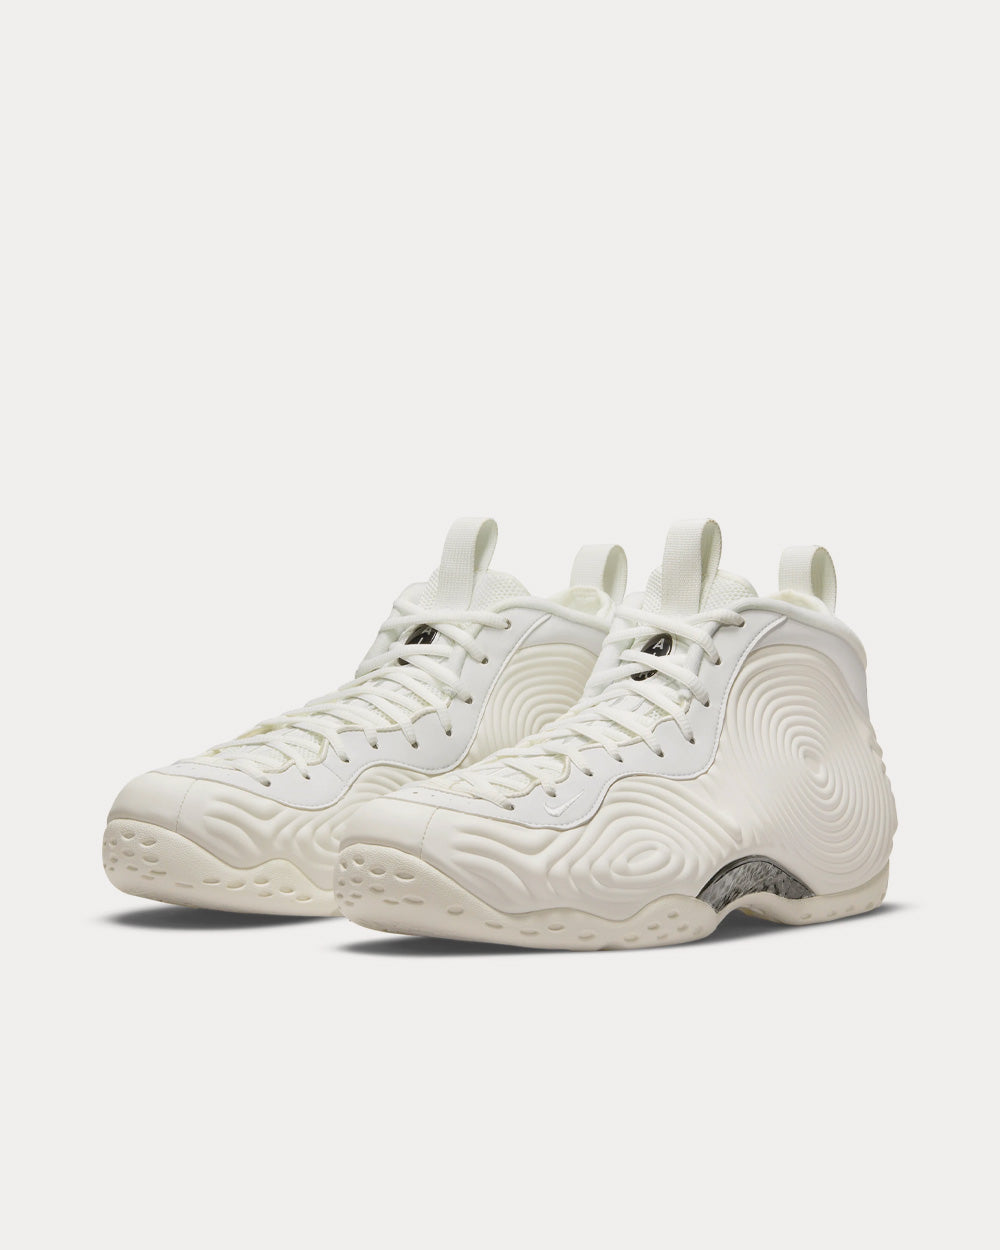 Nike x Comme des Garçons - Air Foamposite One White High Top Sneakers